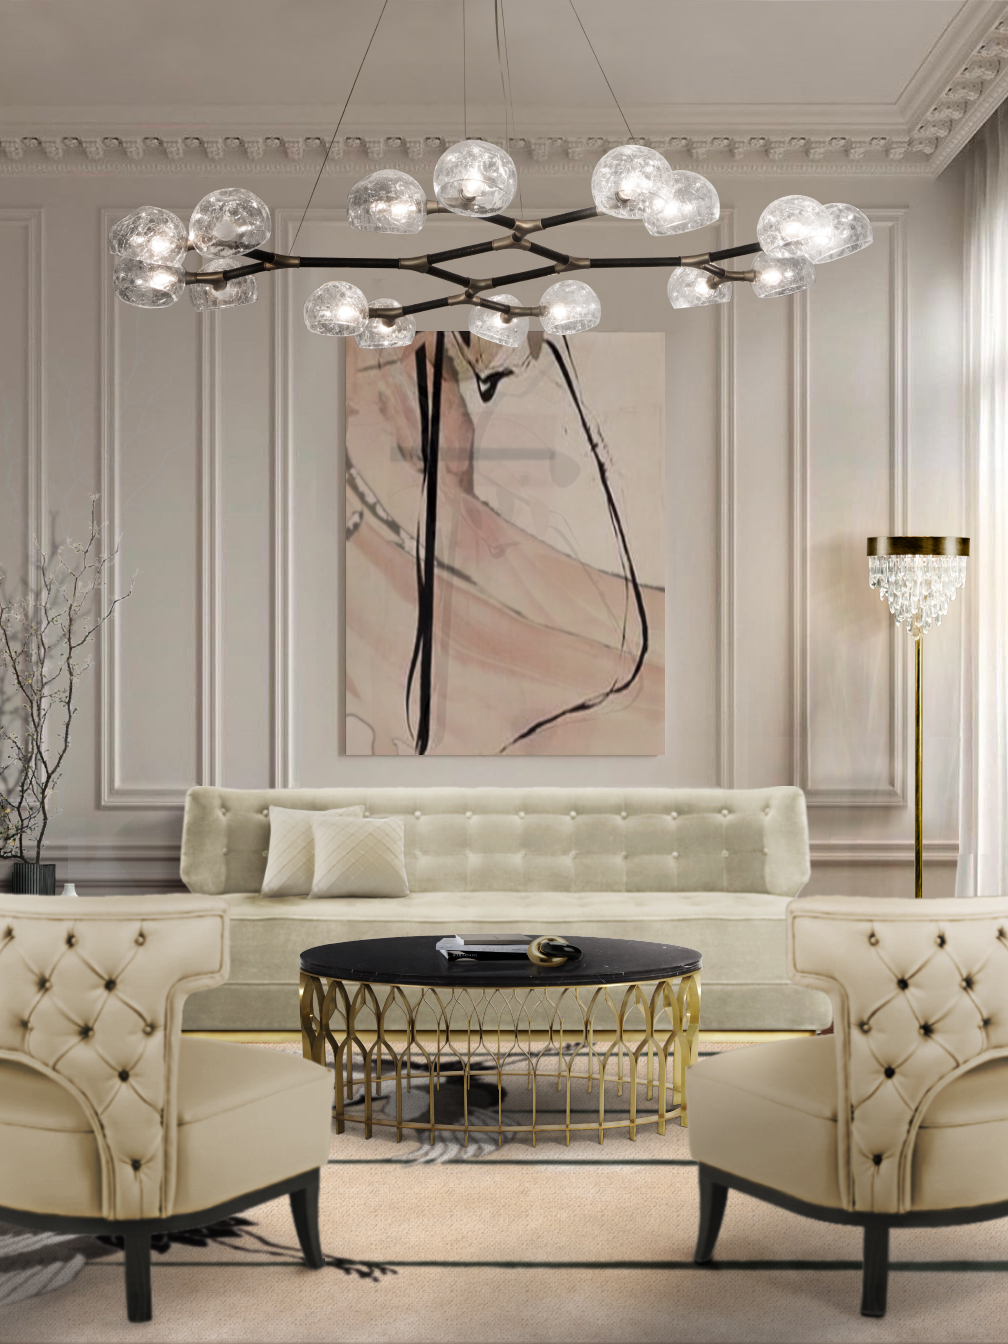 Luxurious Living Room Interior In Neutral Tones - Home'Society